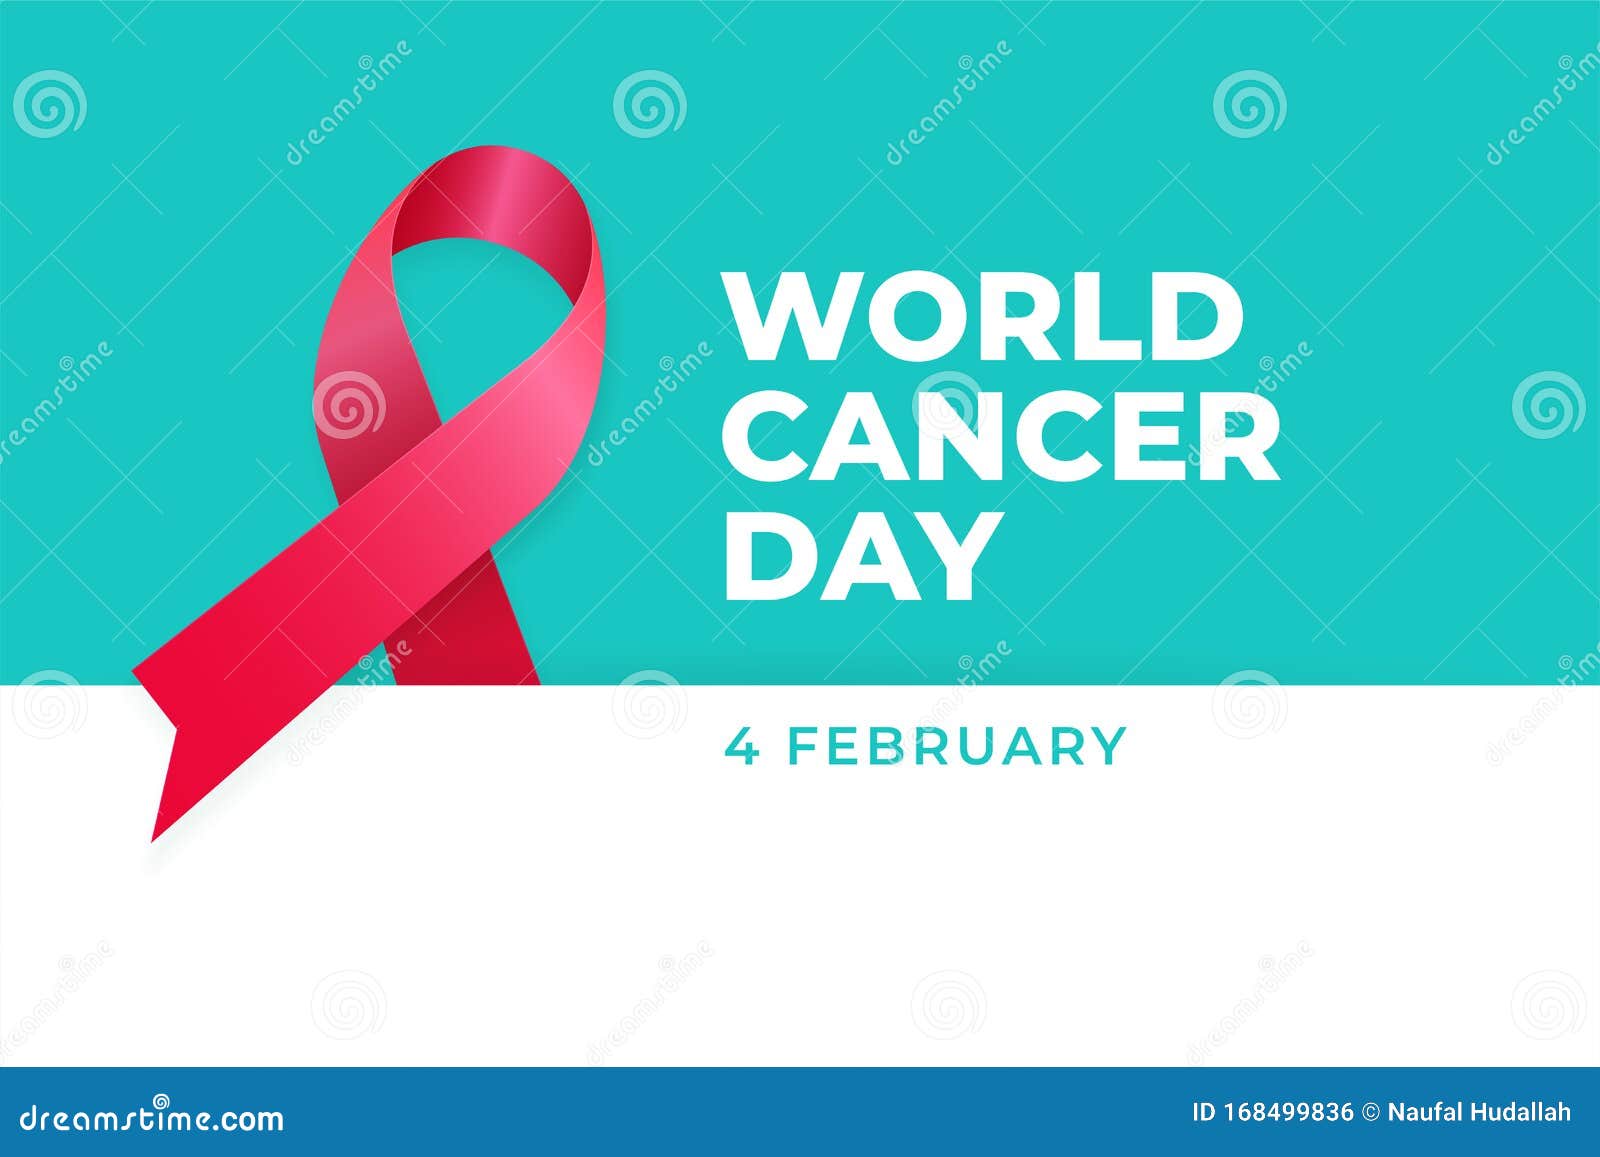 World Cancer Day Poster Background Template Design With Ribbon Symbol Vector Illustration Stock Vector Illustration Of Media Happy